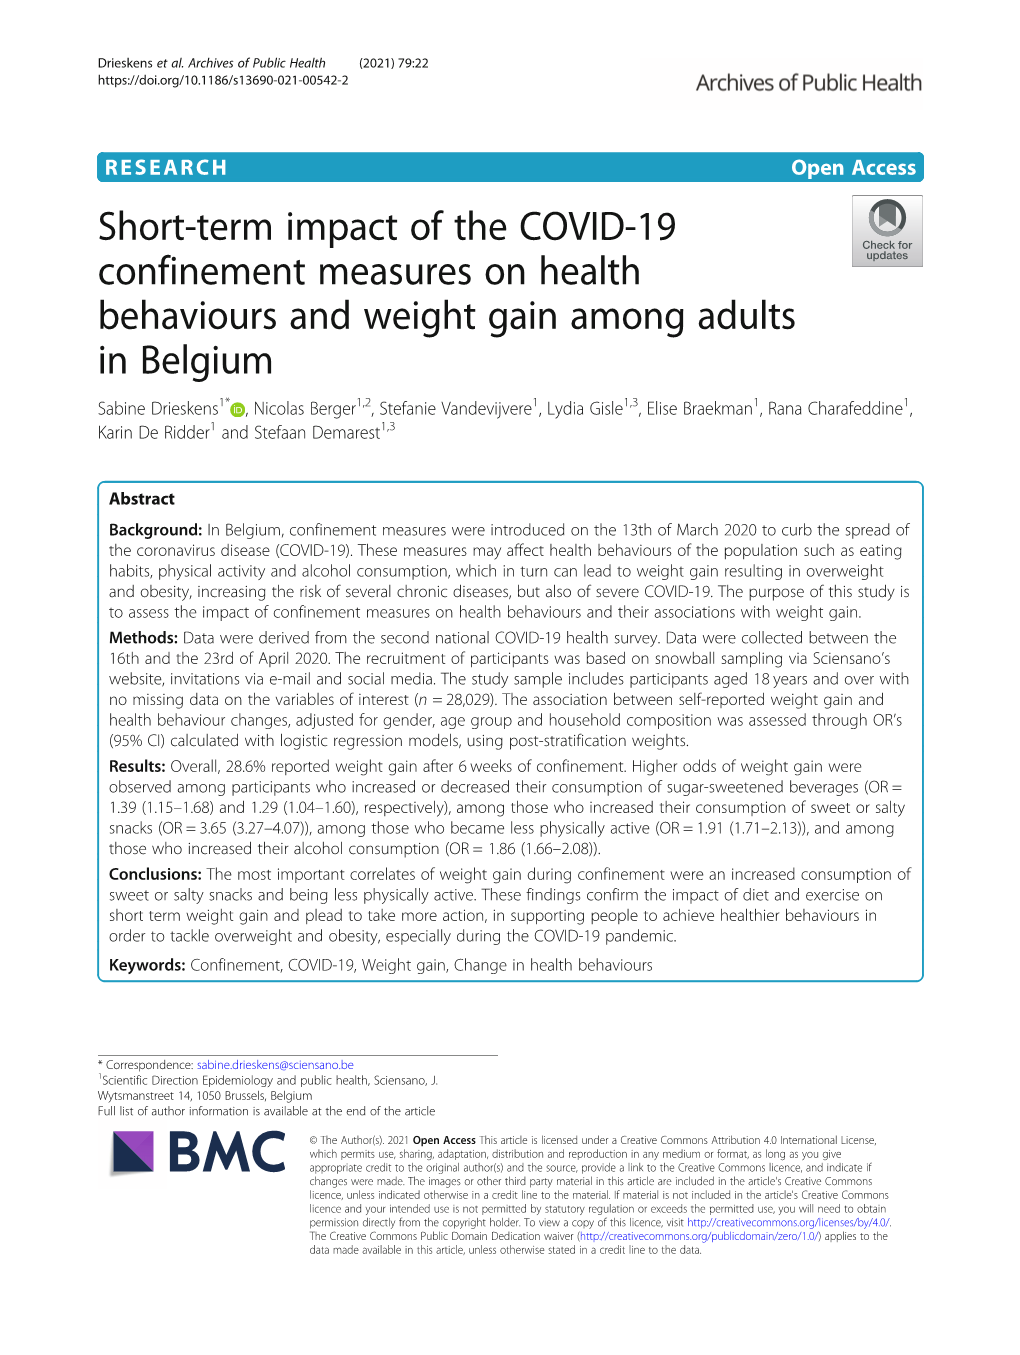 Short-Term Impact of the COVID-19 Confinement Measures on Health